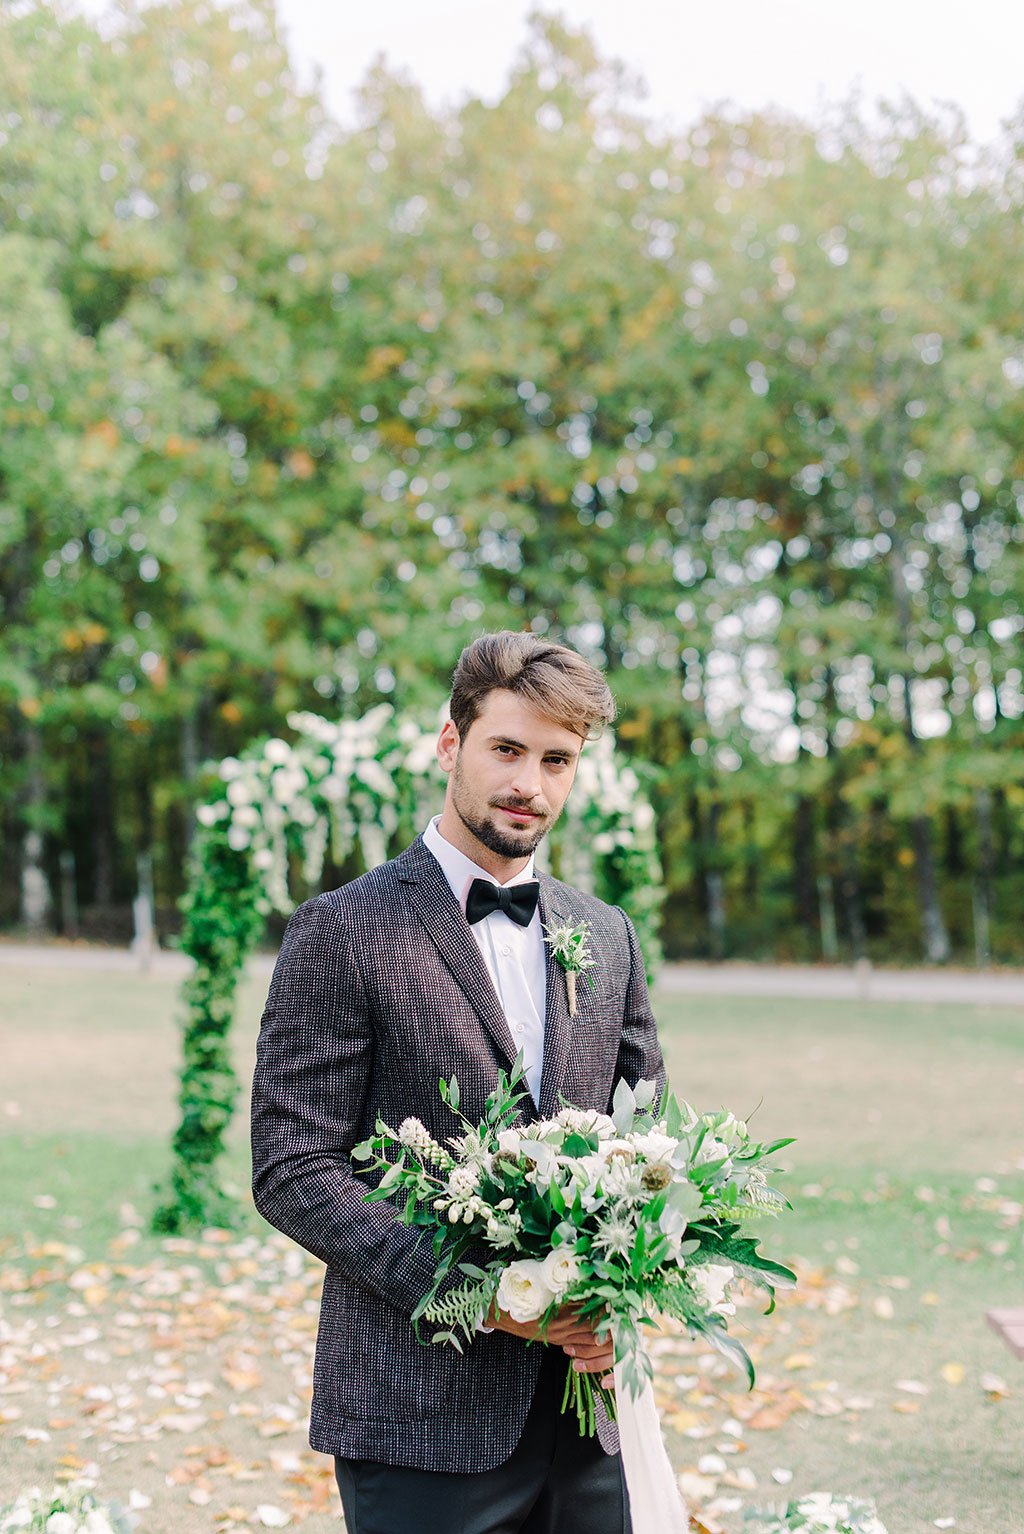 portrait the groom with the wedding bouquet, Inspirational boudoir & bridal photoshoot